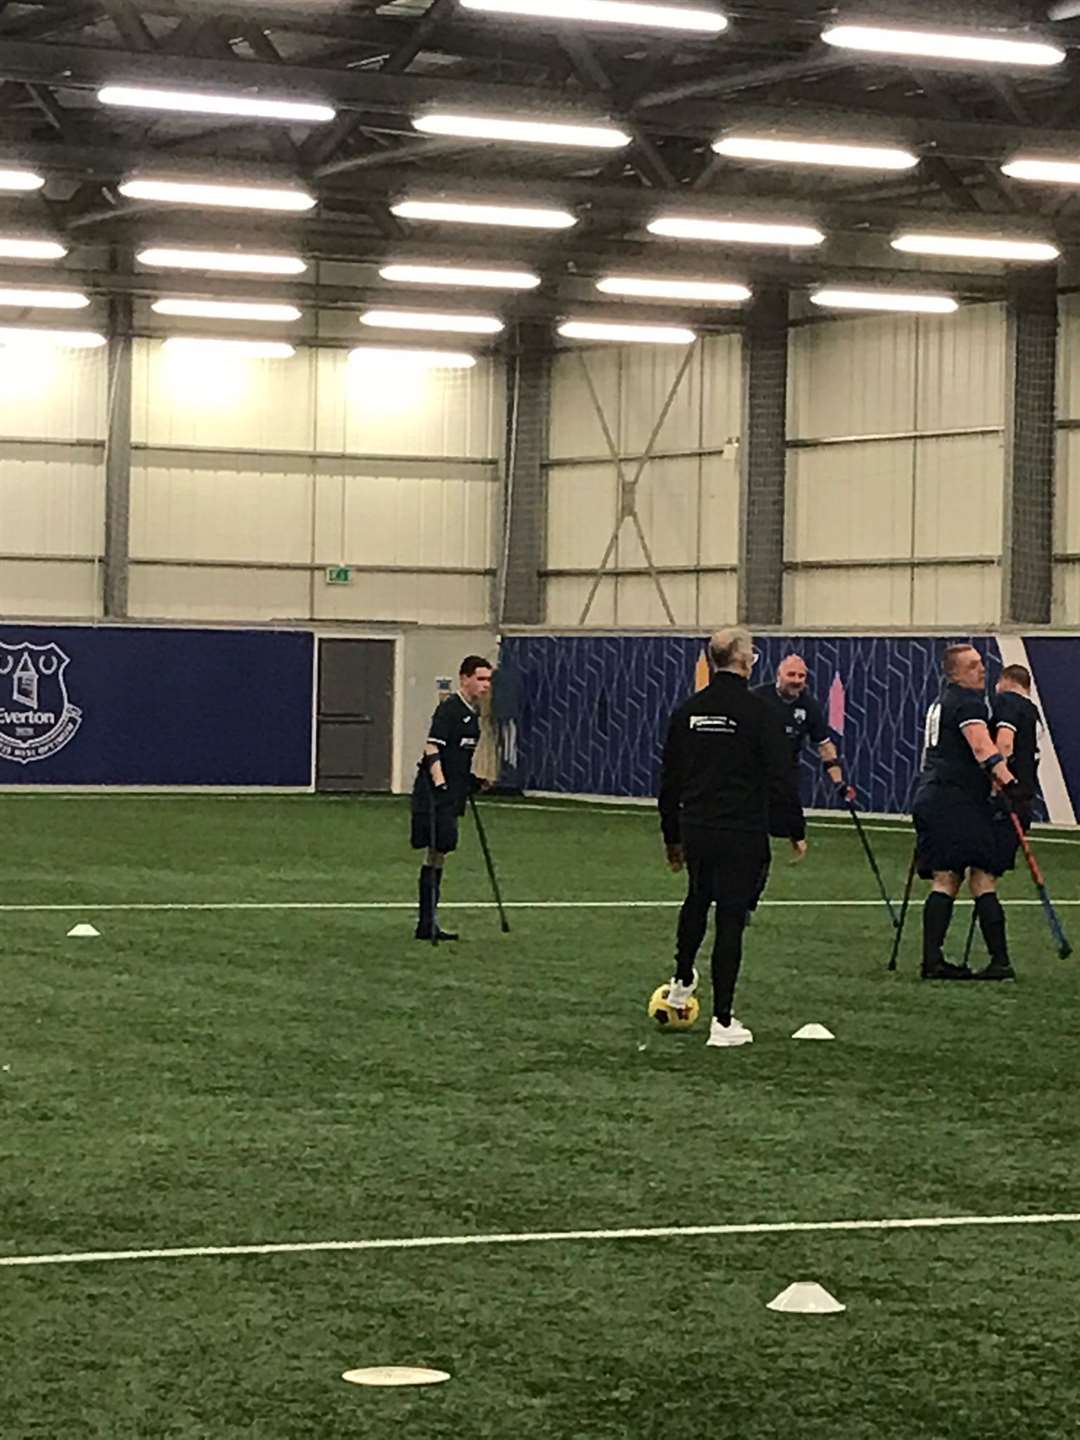 Connor was invited to train at Everton after he took up amputee football following his cancer treatment (Connor and Pauline Elliot/PA)